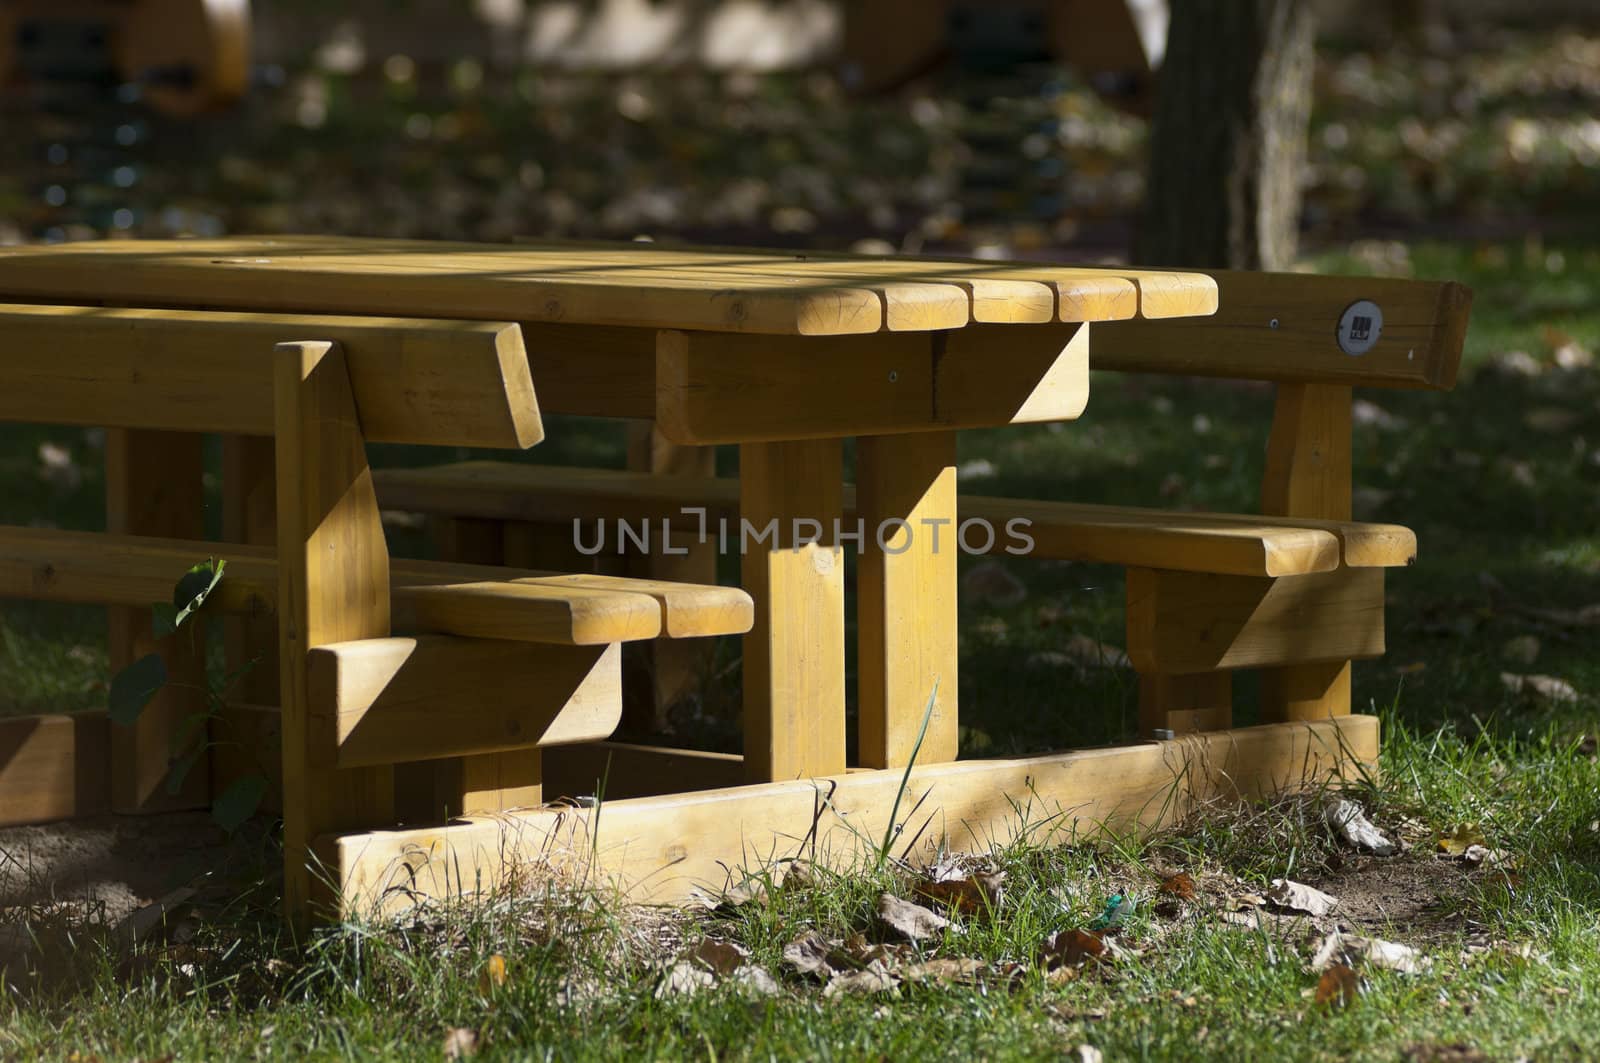 Detail of a wooden picnic table and bench